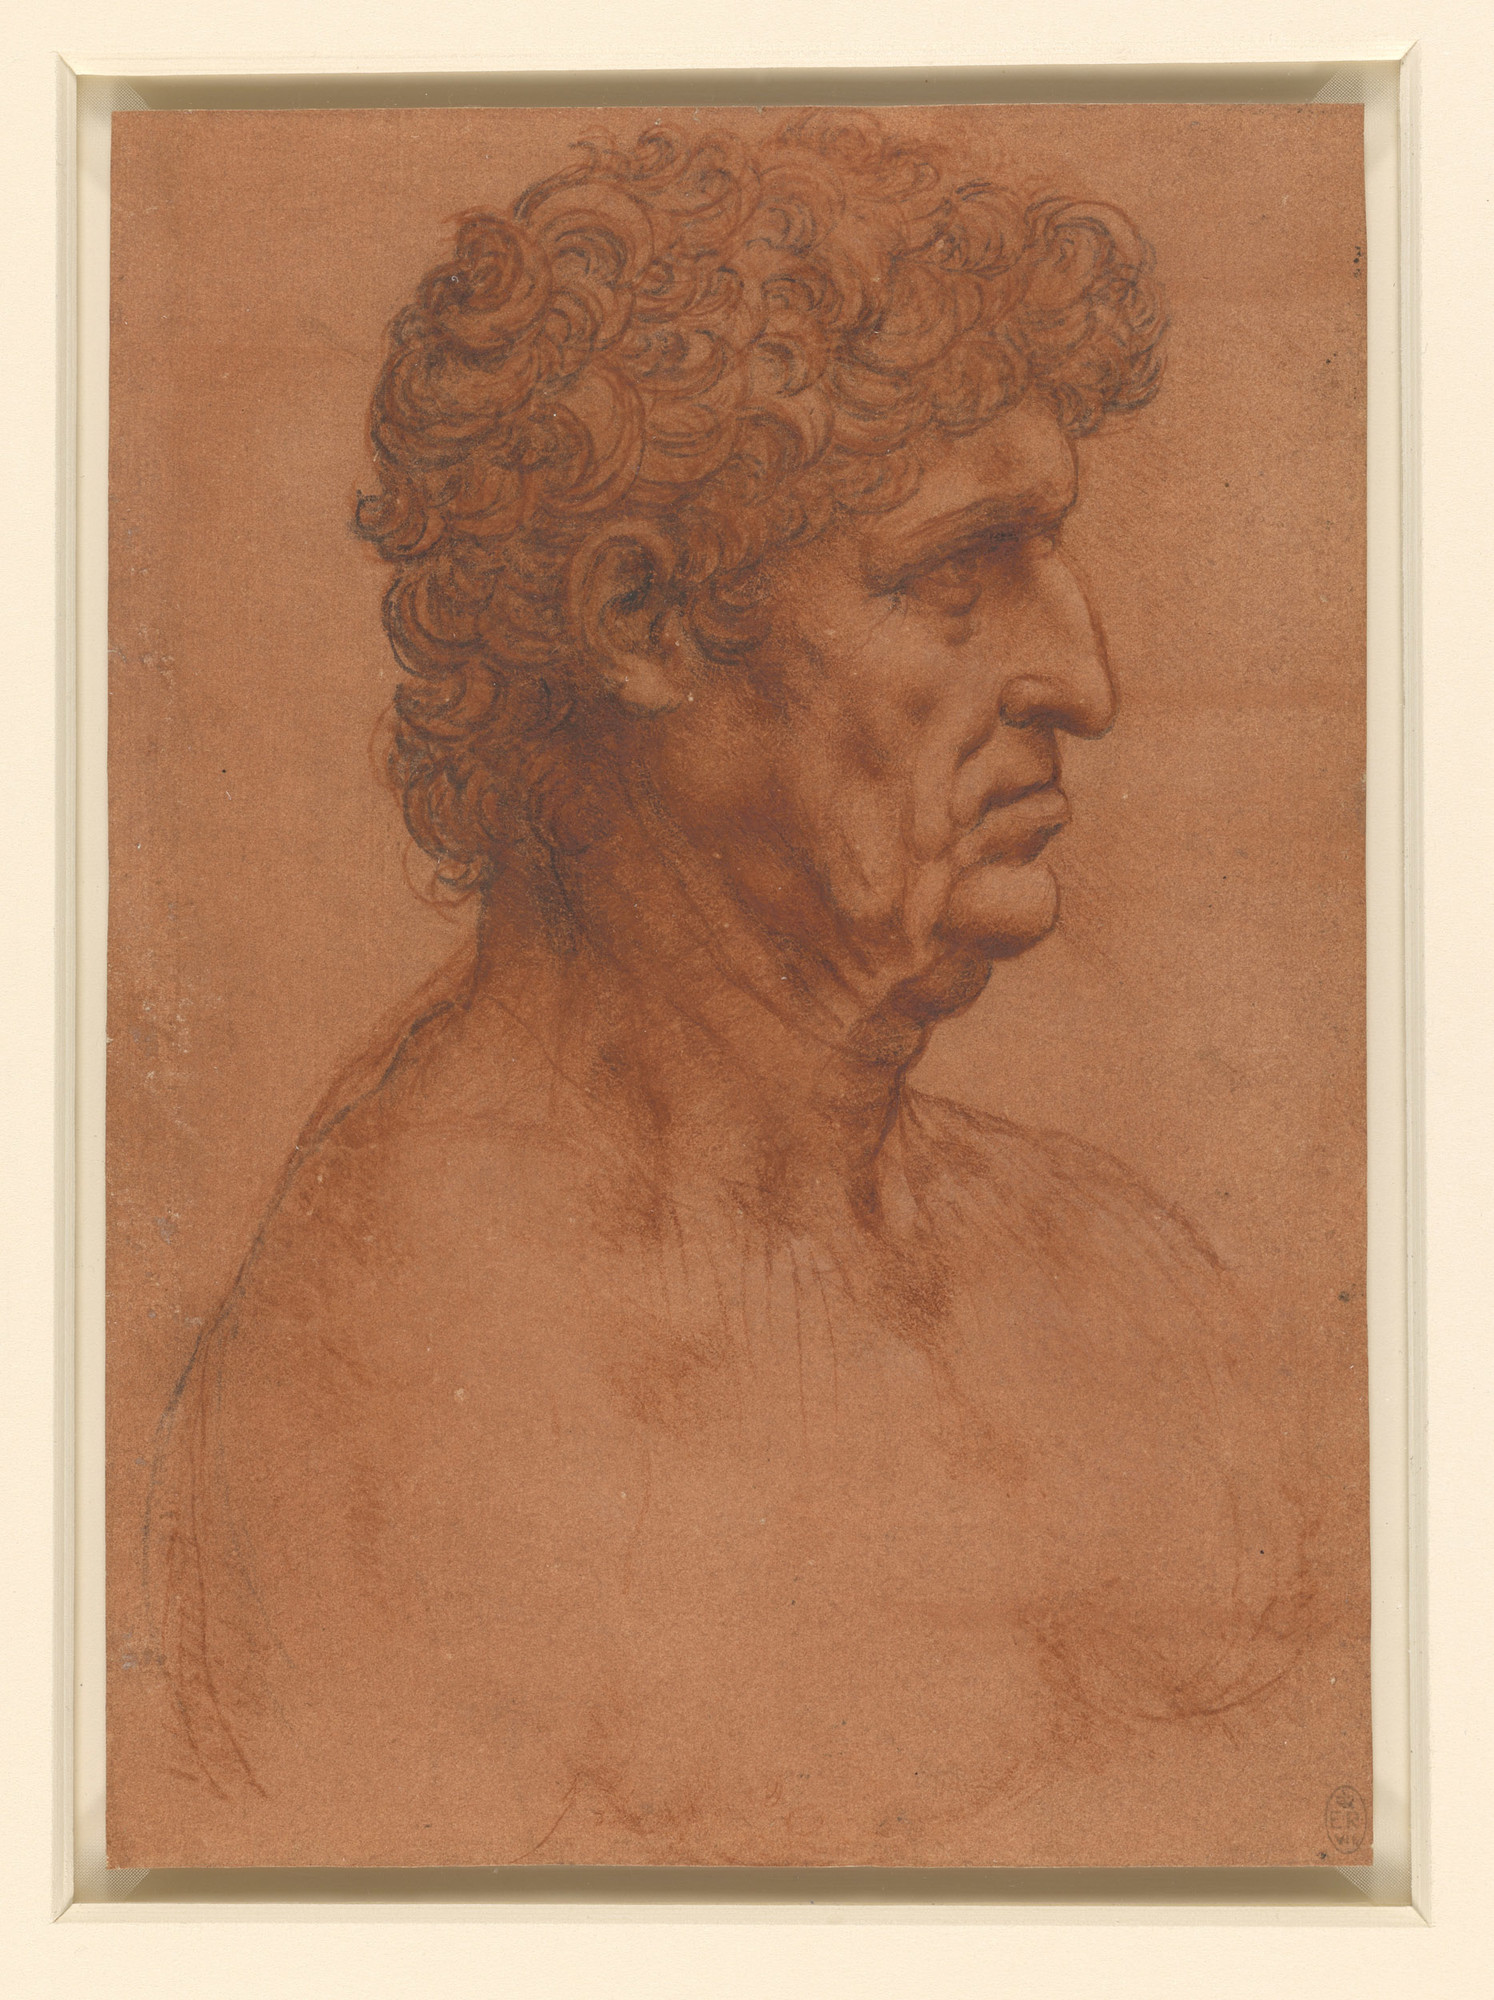 A drawing of the head and shoulders of an elderly man, his head turned in profile to the right, and his body three quarters to the right. He has thick curly hair, and a heavy neck and jaw. 
Early in his career Leonardo fixed on two standard male types, wh